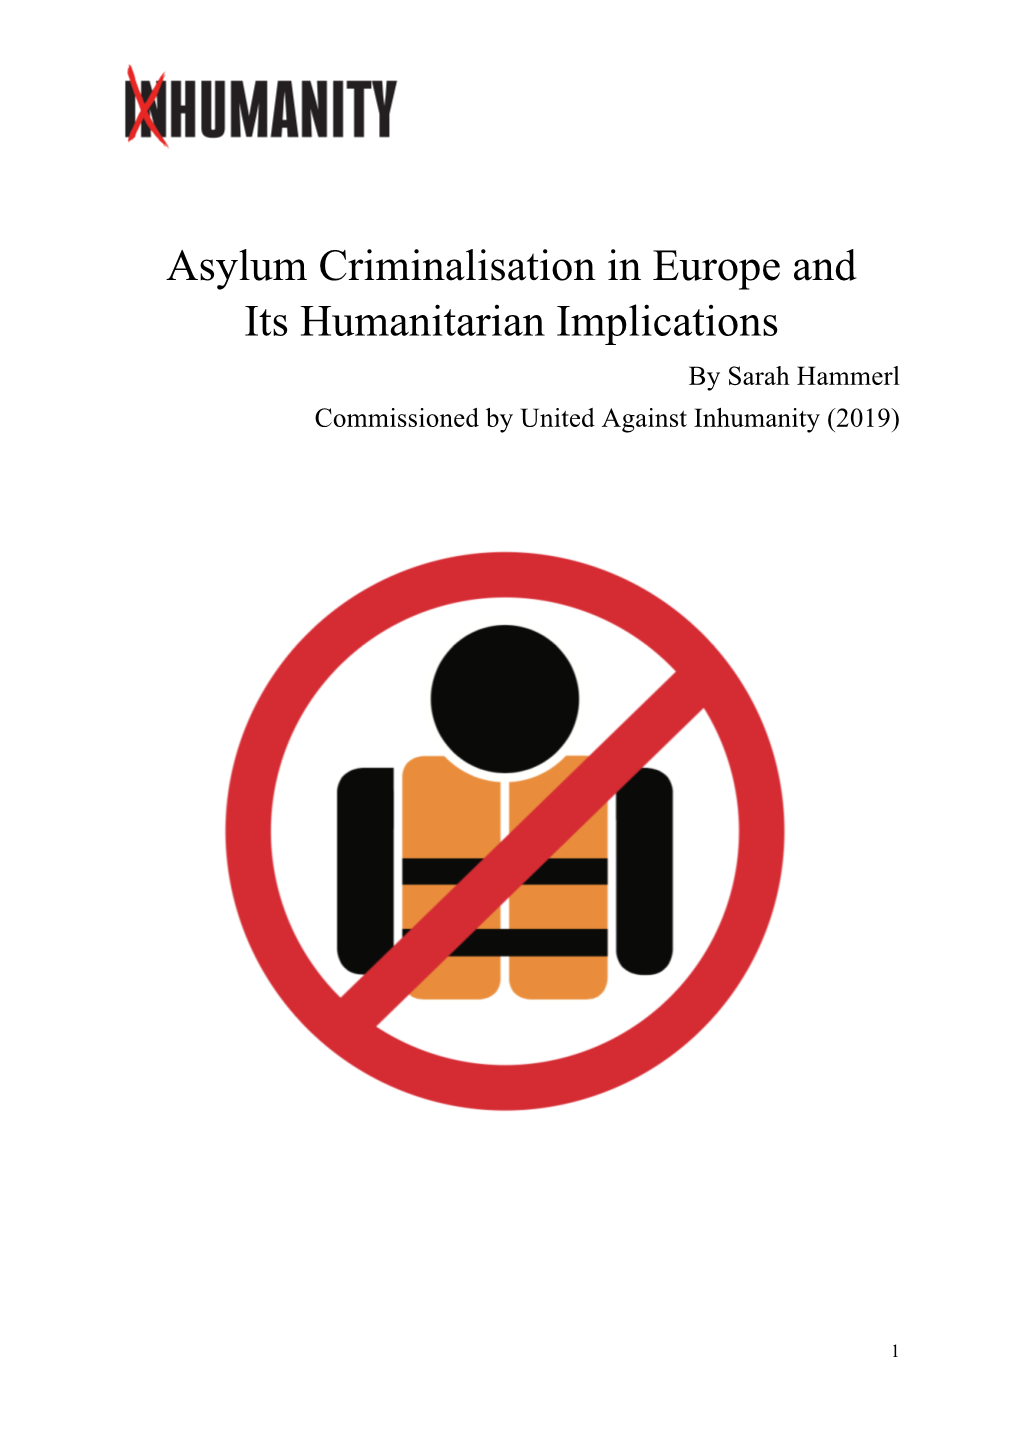 Asylum Criminalisation in Europe and Its Humanitarian Implications by Sarah Hammerl Commissioned by United Against Inhumanity (2019)